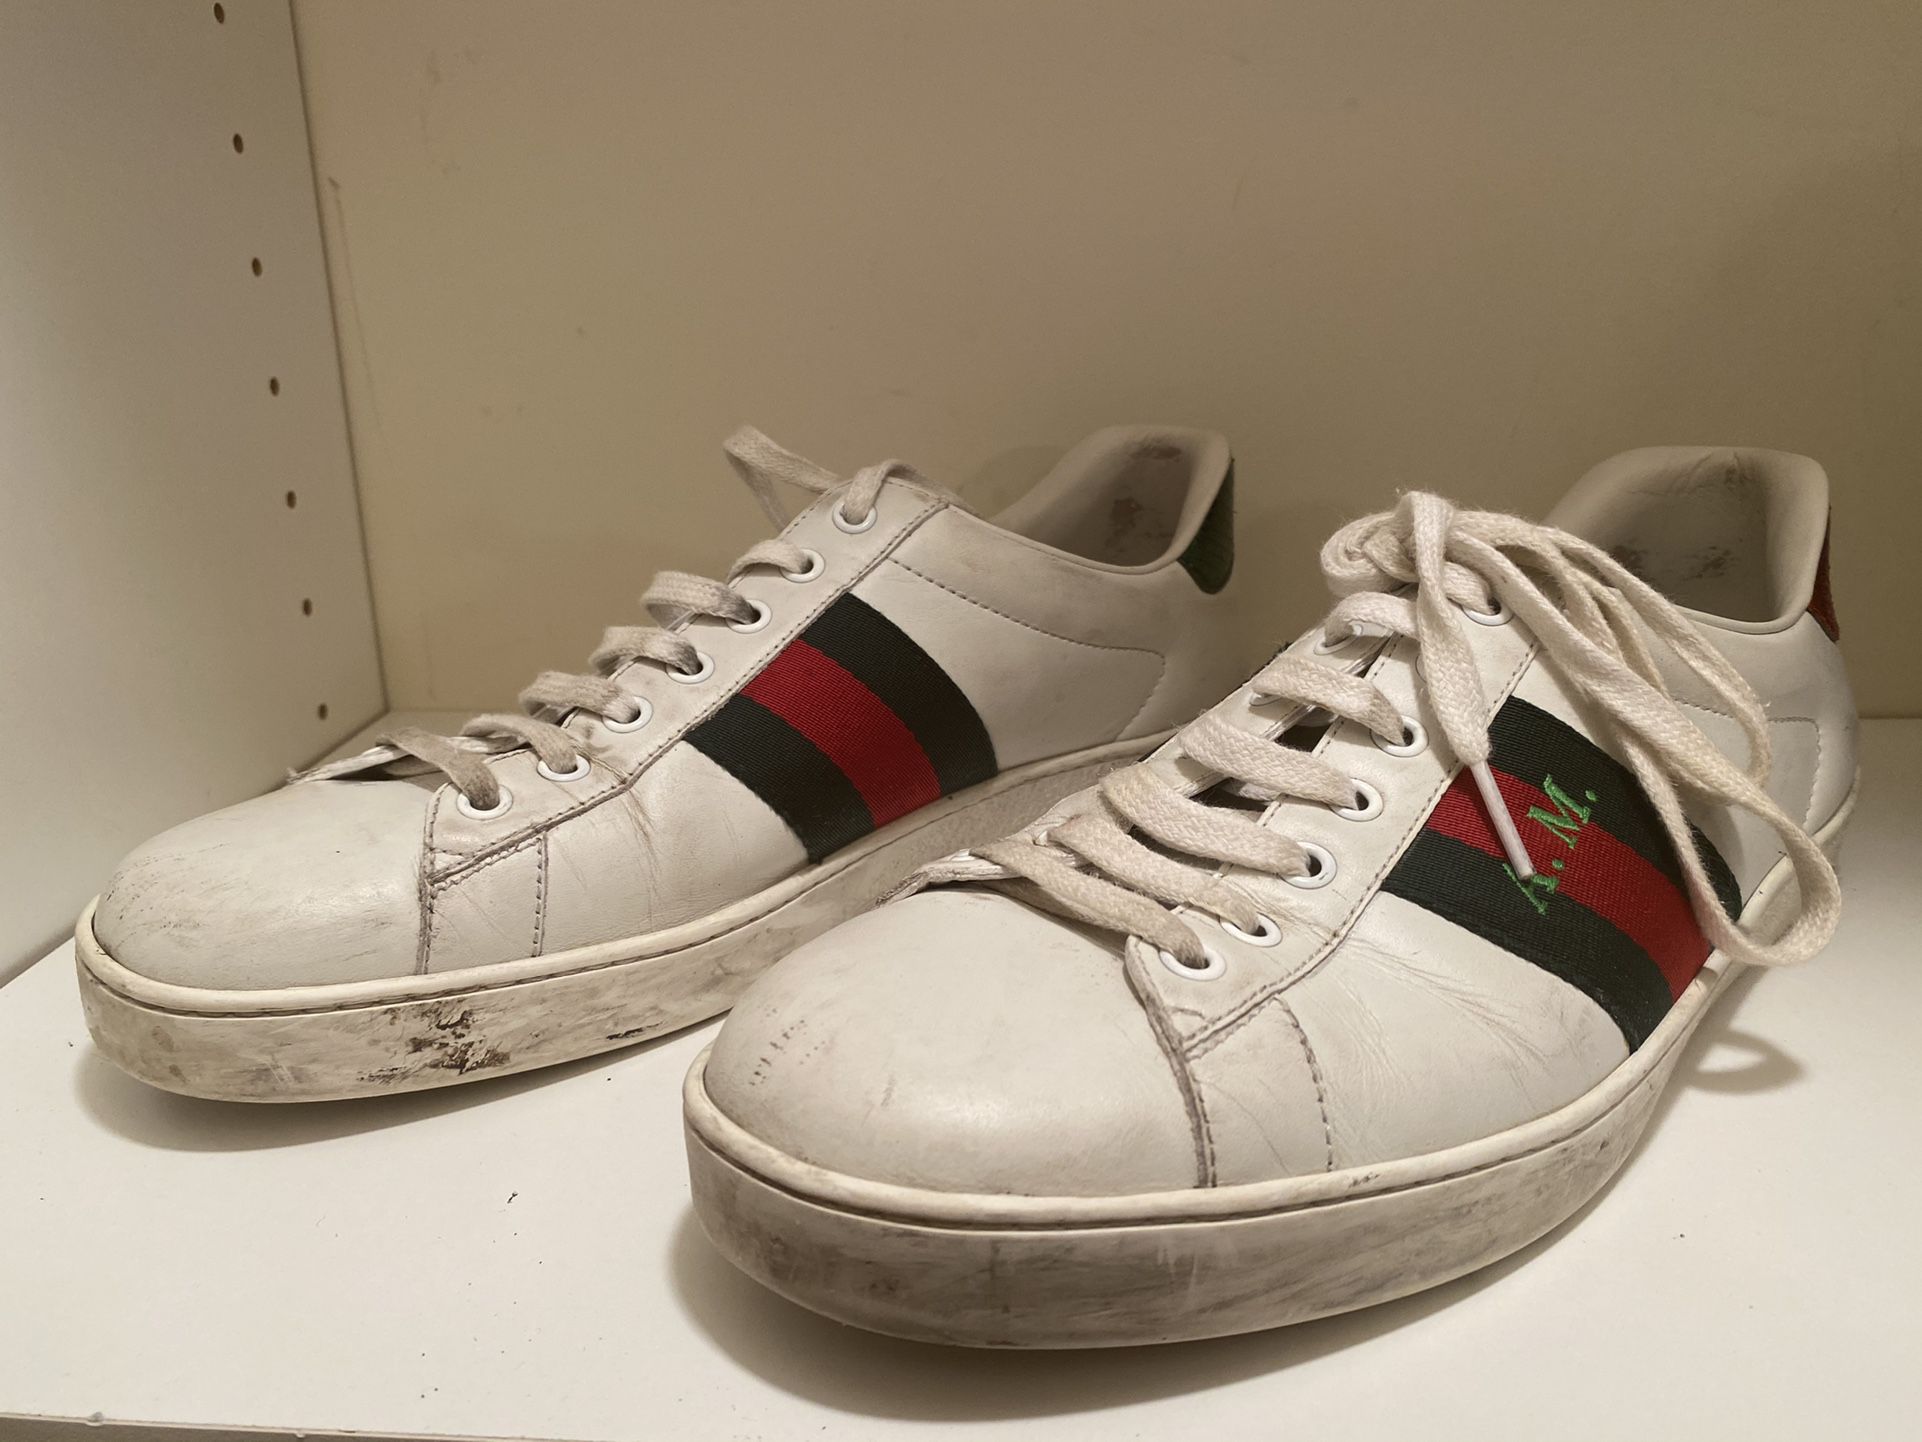 Authentic Gucci Ace (Worn)